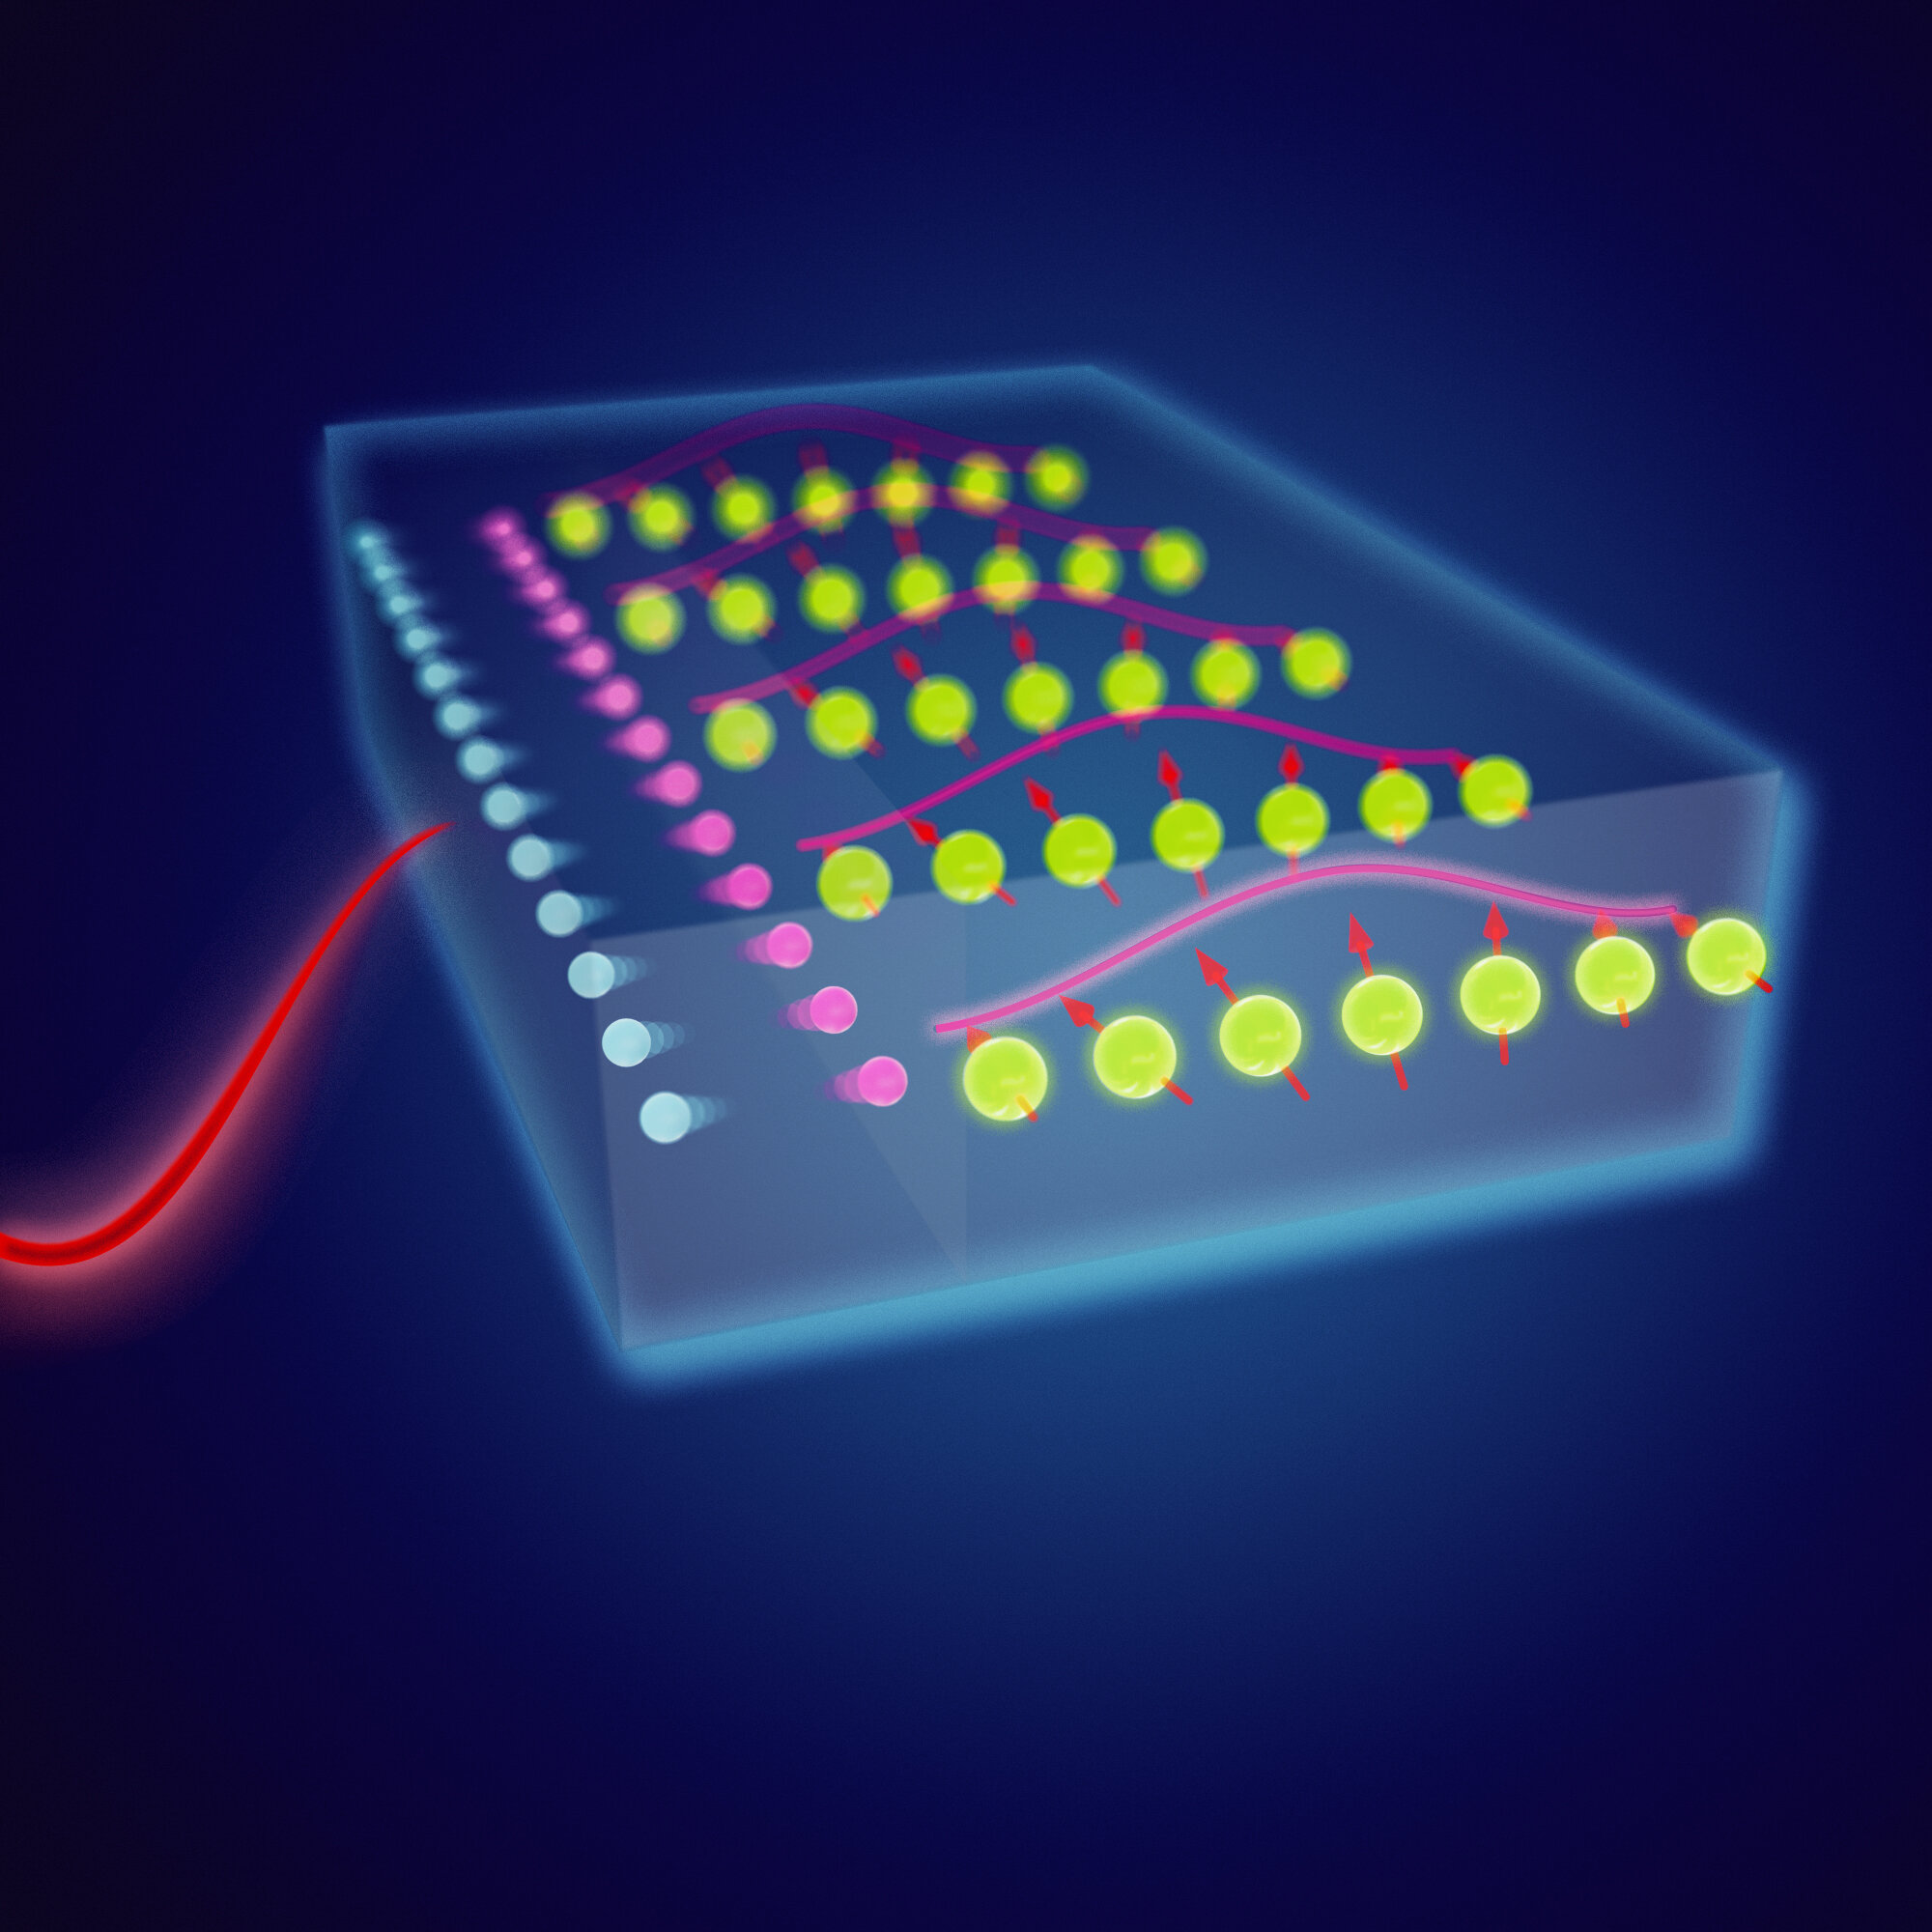 #Scientists couple terahertz radiation with spin waves